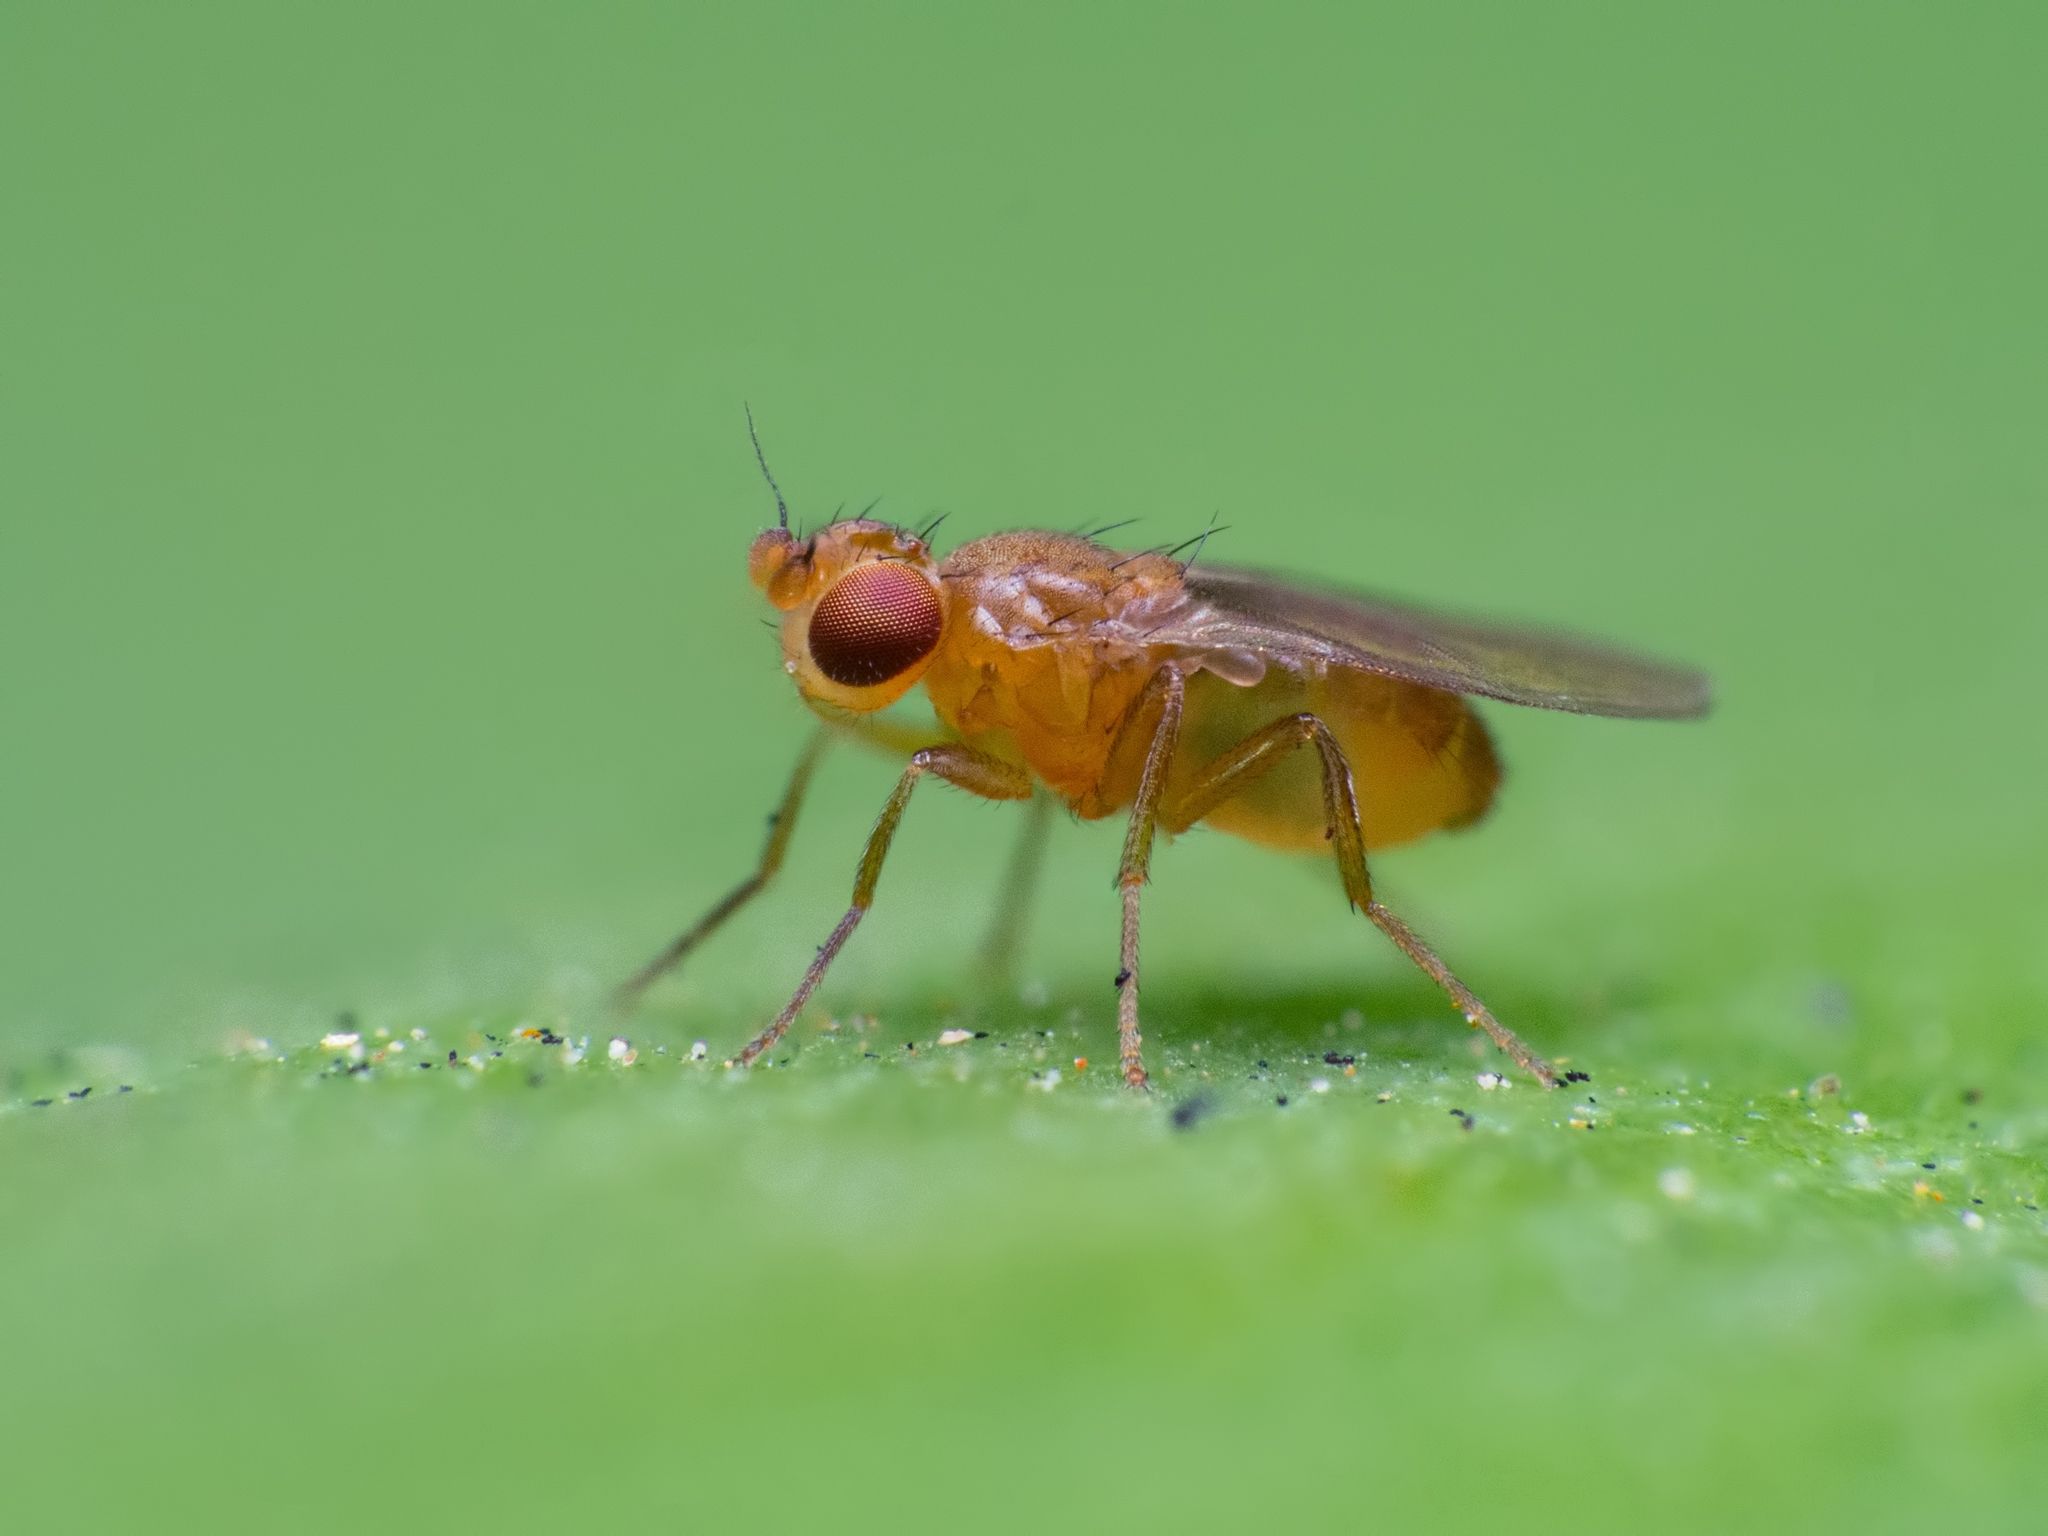 How to get rid of fruit flies and other kitchen bugs - Reader's Digest